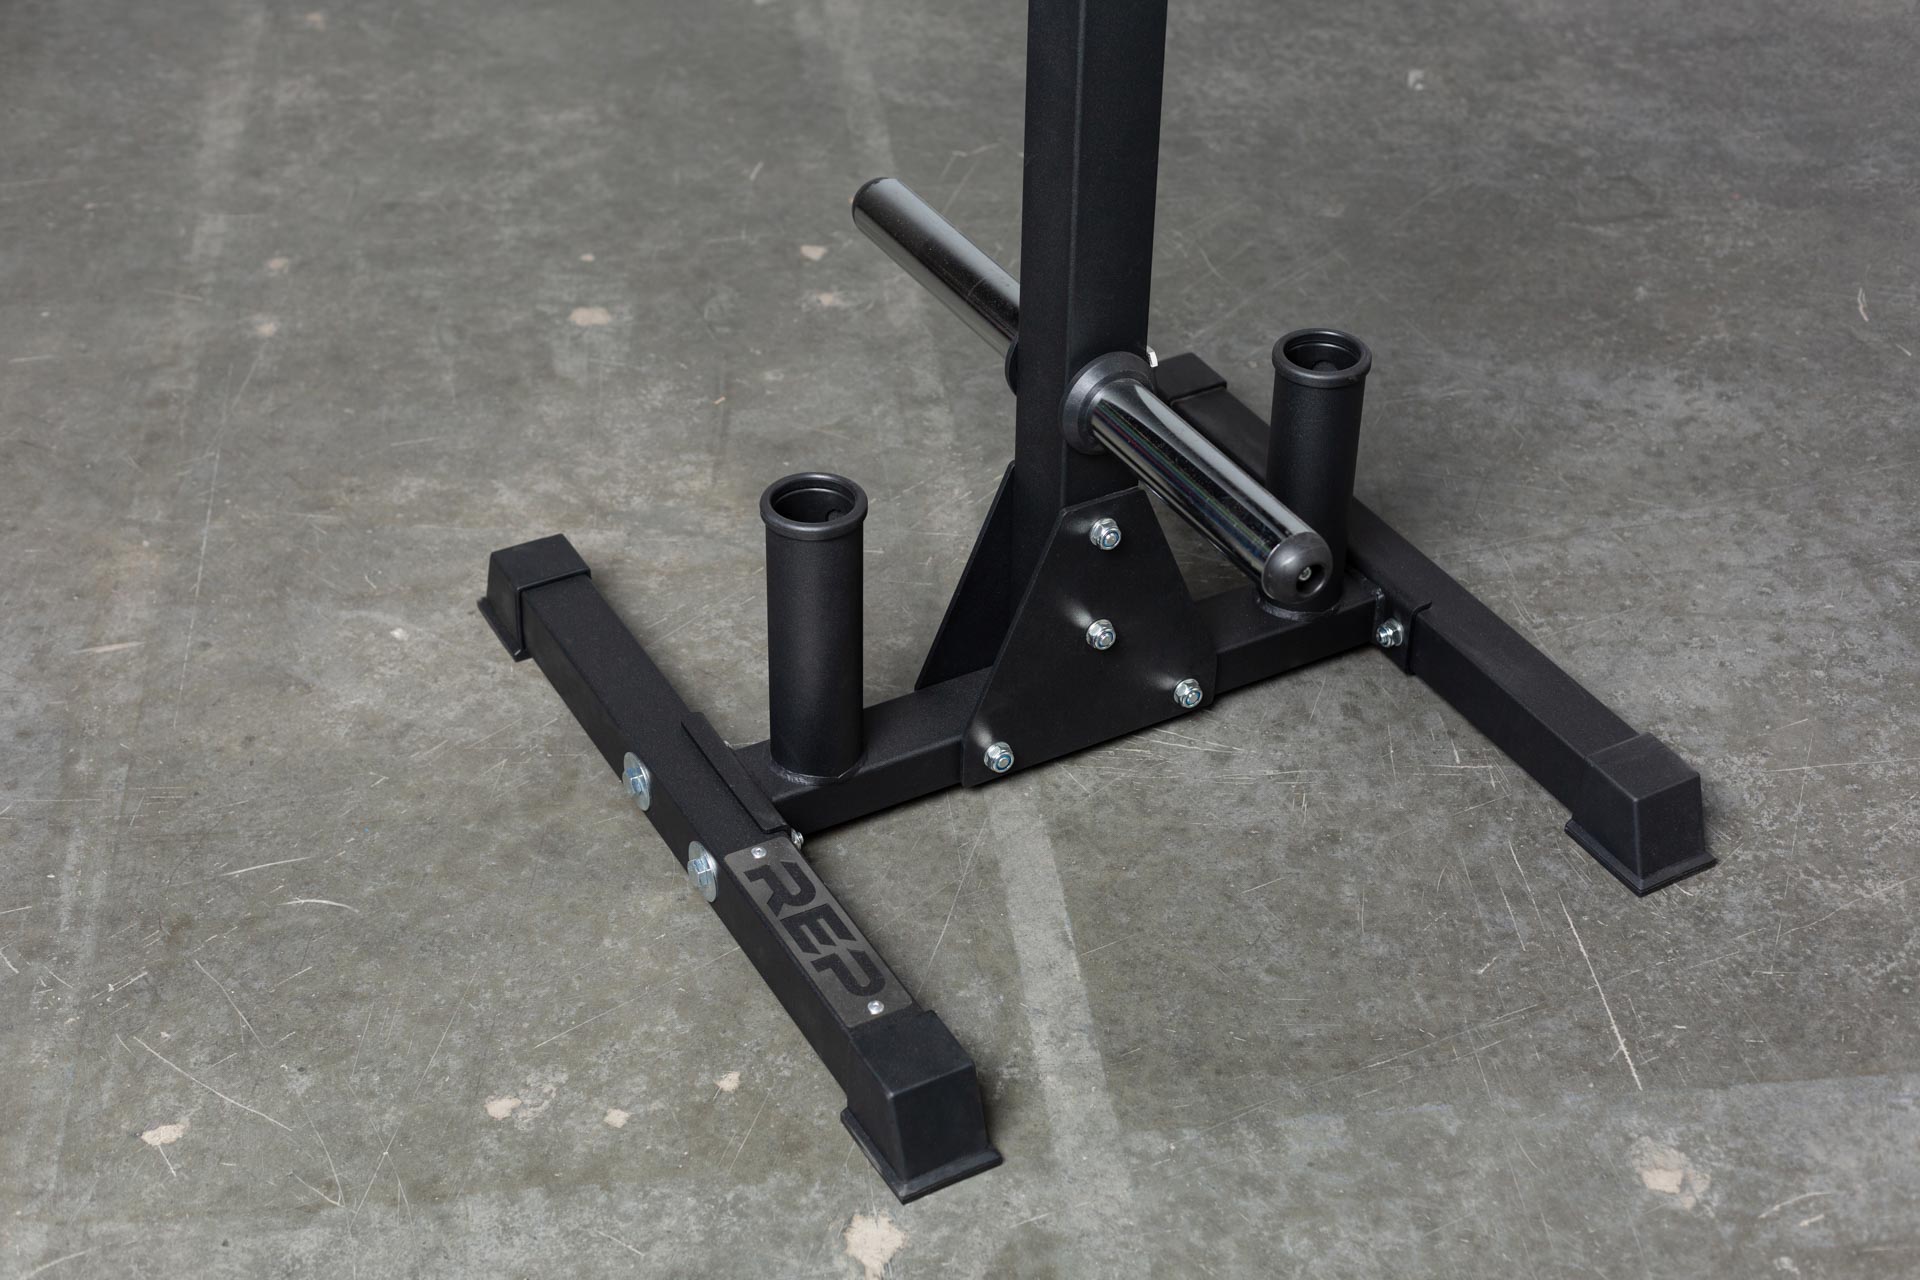 Close-up view of the bottom section of the REP Bar and Weight Plate Tree showing the bottom weight horns and the two barbell holders.